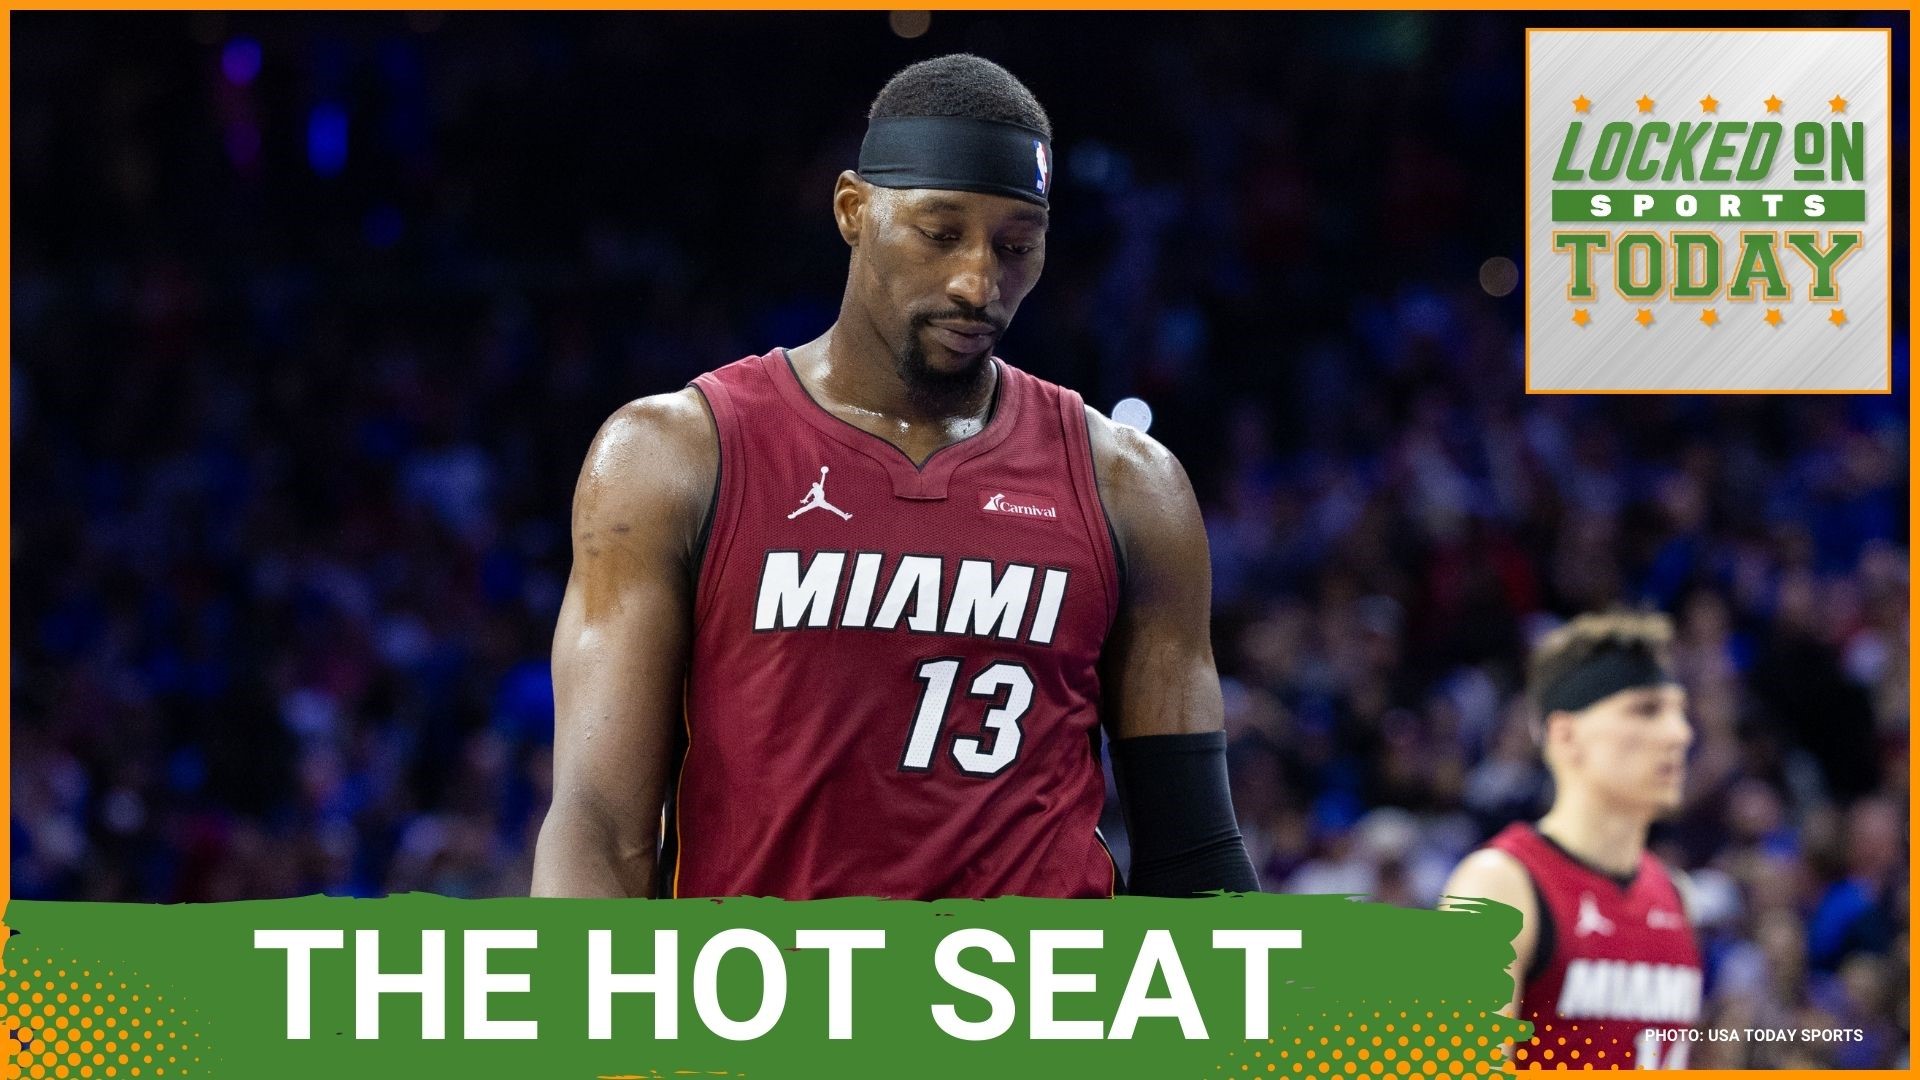 Discussing the day's top sports stories from the Heat down to their last chance to make the playoffs to the Hawks lose to the Bulls and a look into the NFL draft.